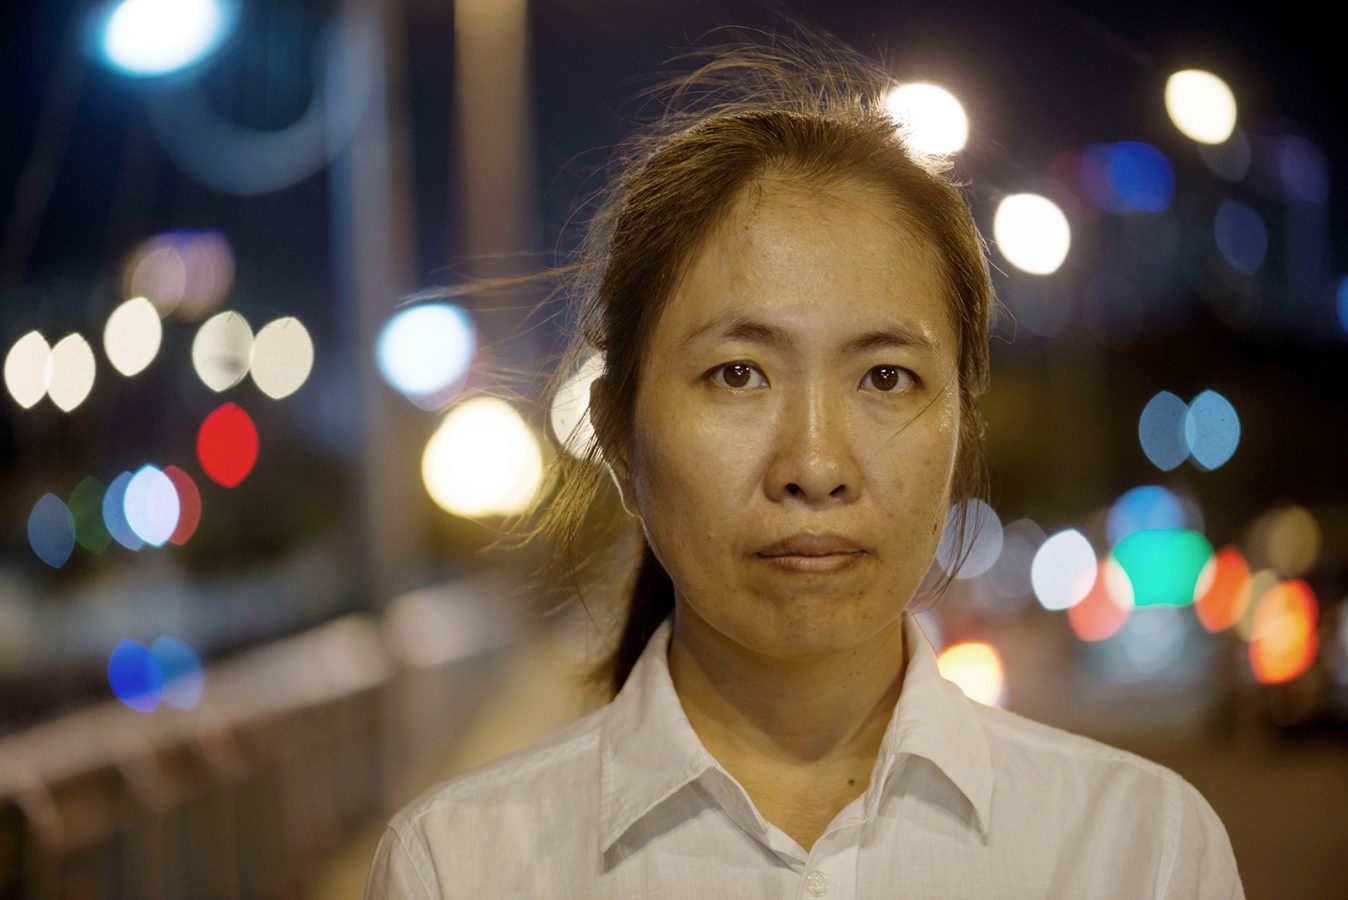 A Vietnamese women wearing a white shirt stares into the camera. It is nighttime and the lights of a city twinkle behind her.